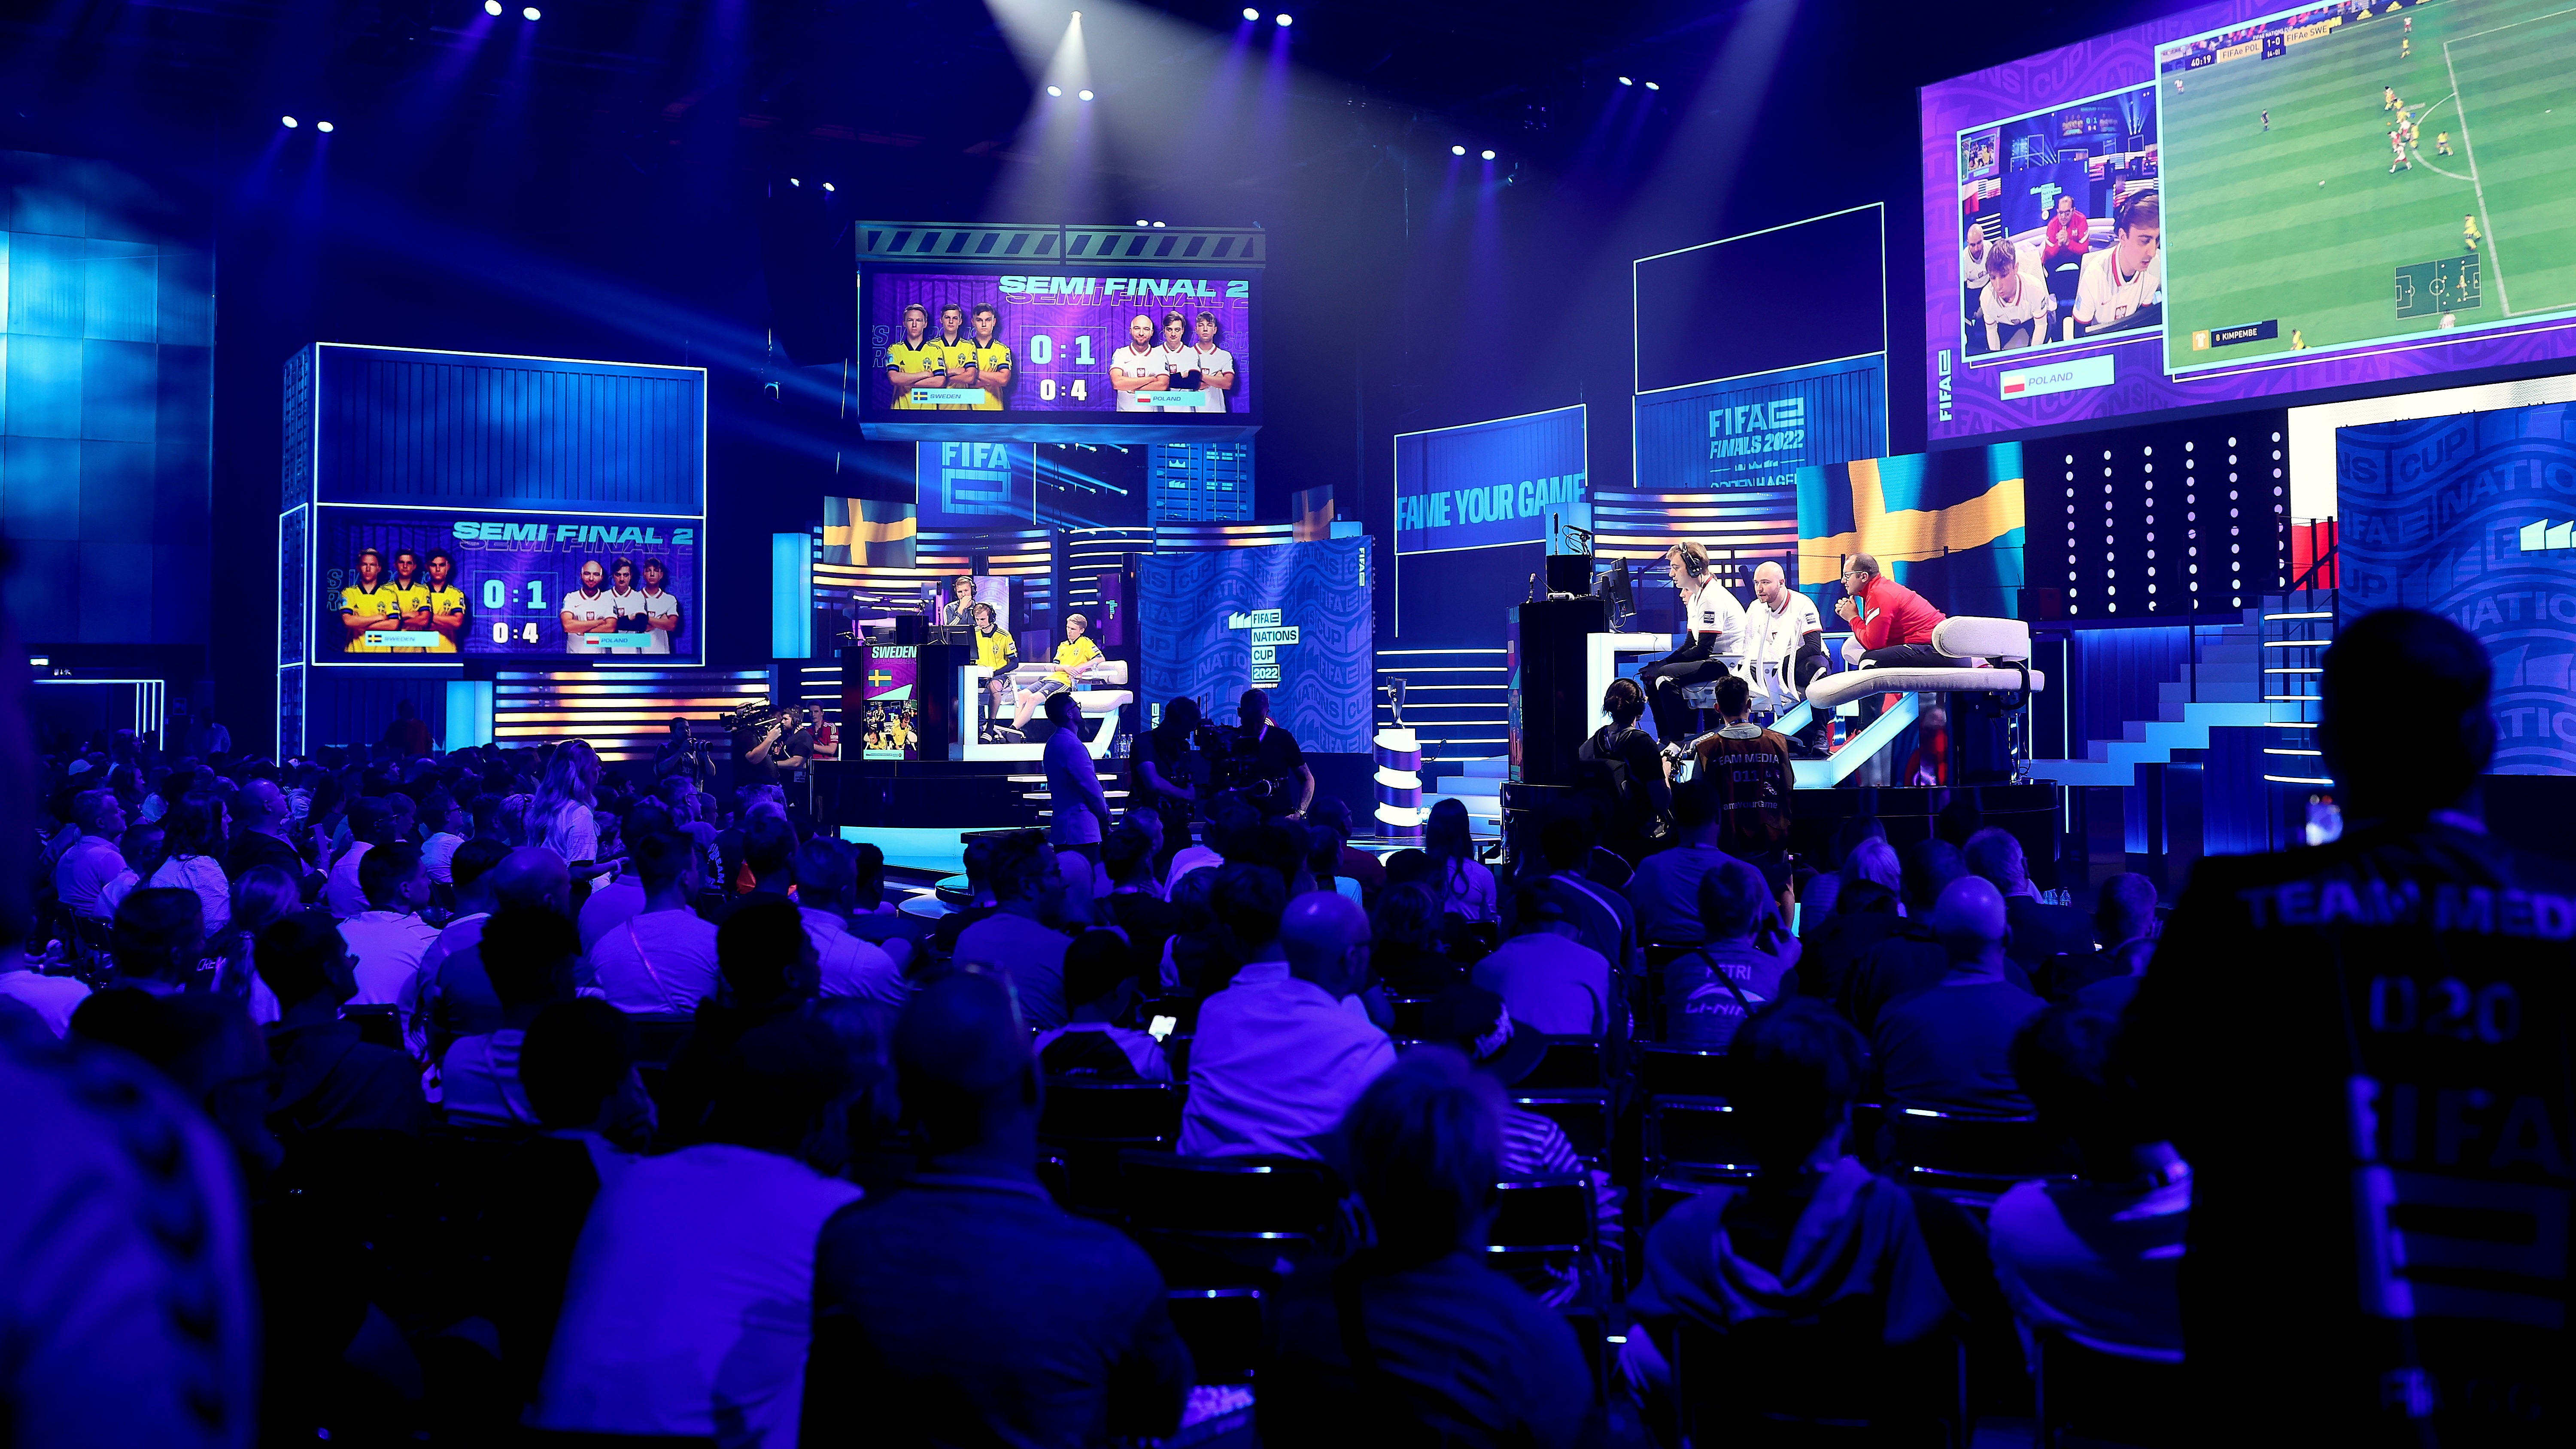 How to compete in FIFA esports Curtain raises on new FIFAe season